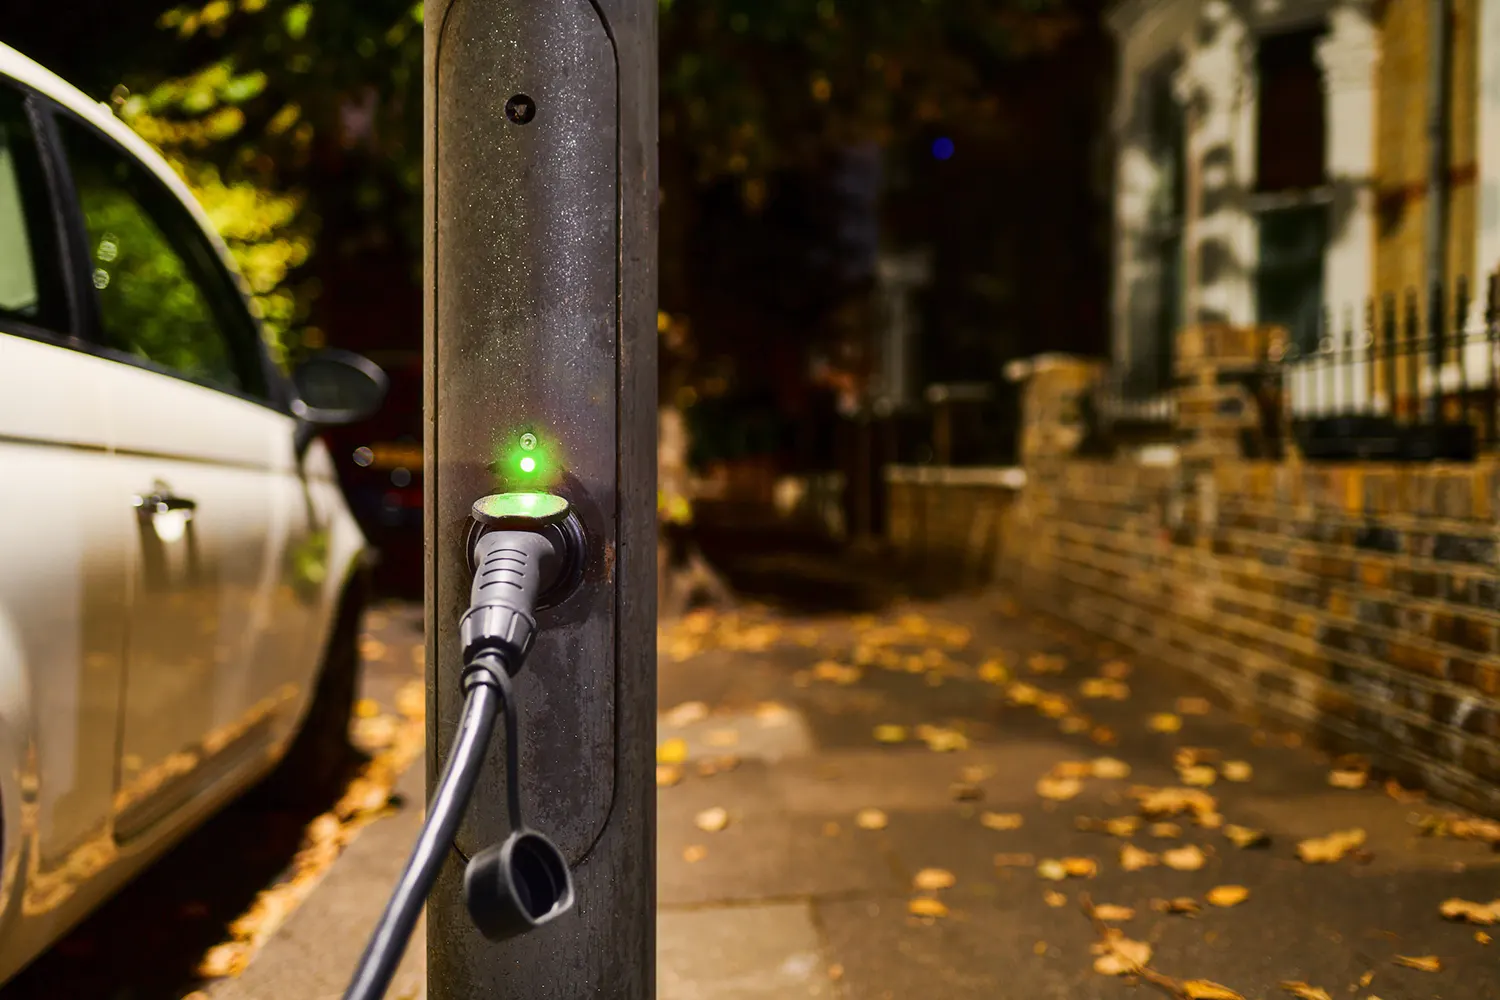 ubitricity to Deploy and Manage Network of 1,050 Public Electric Vehicle Charge Points in Richmond and Wandsworth